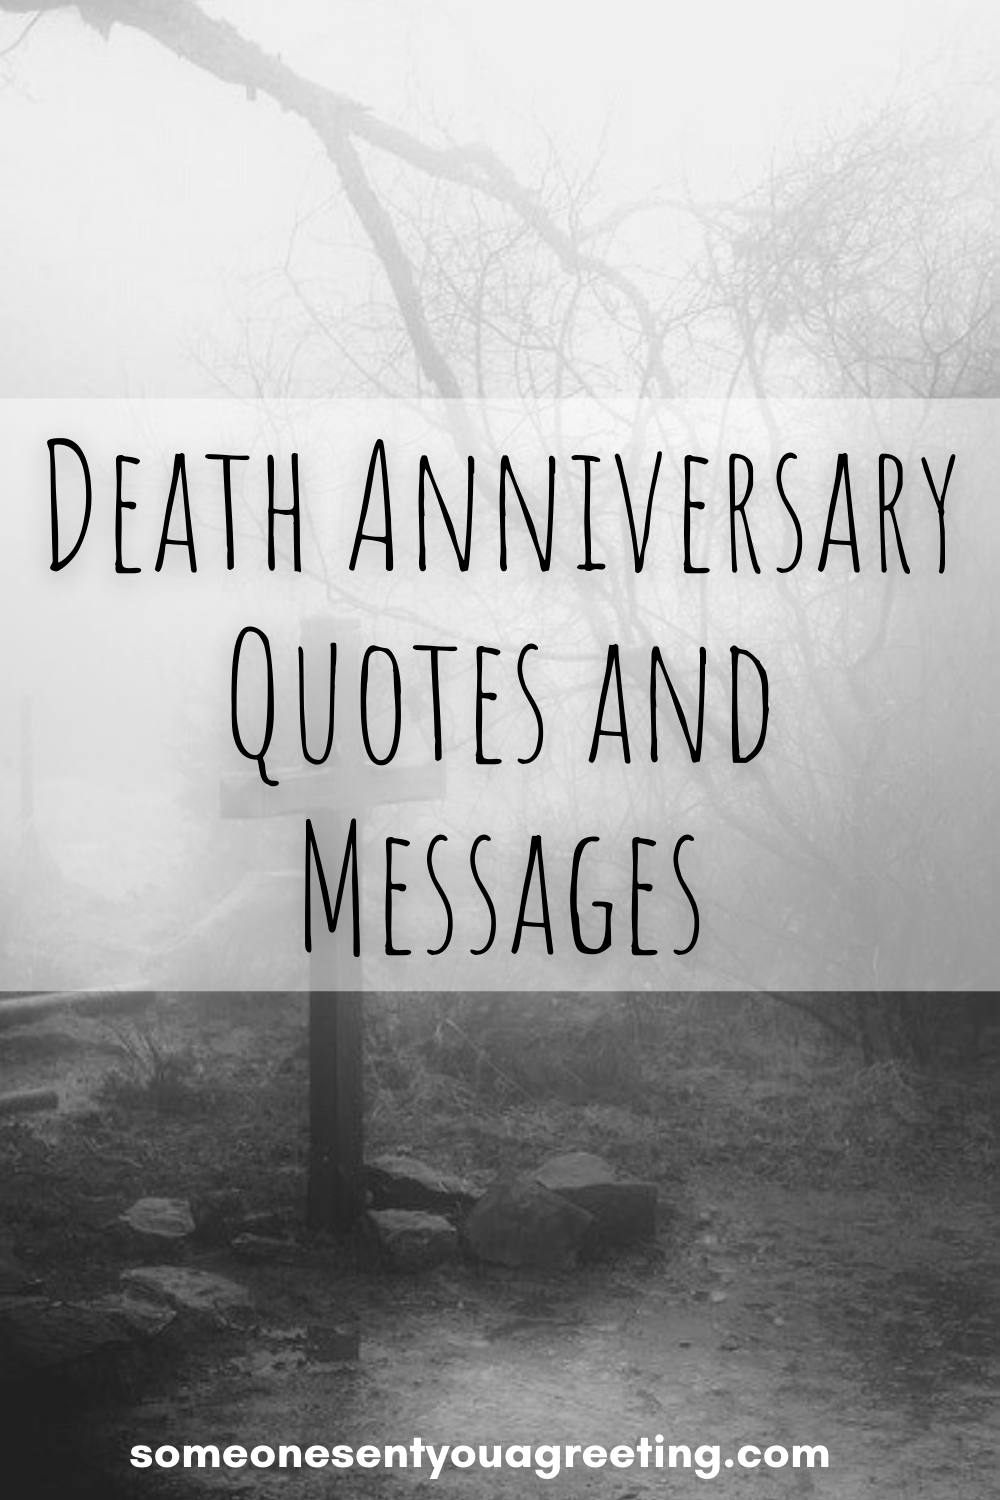 82 Touching Death Anniversary Quotes and Messages - Someone Sent You A